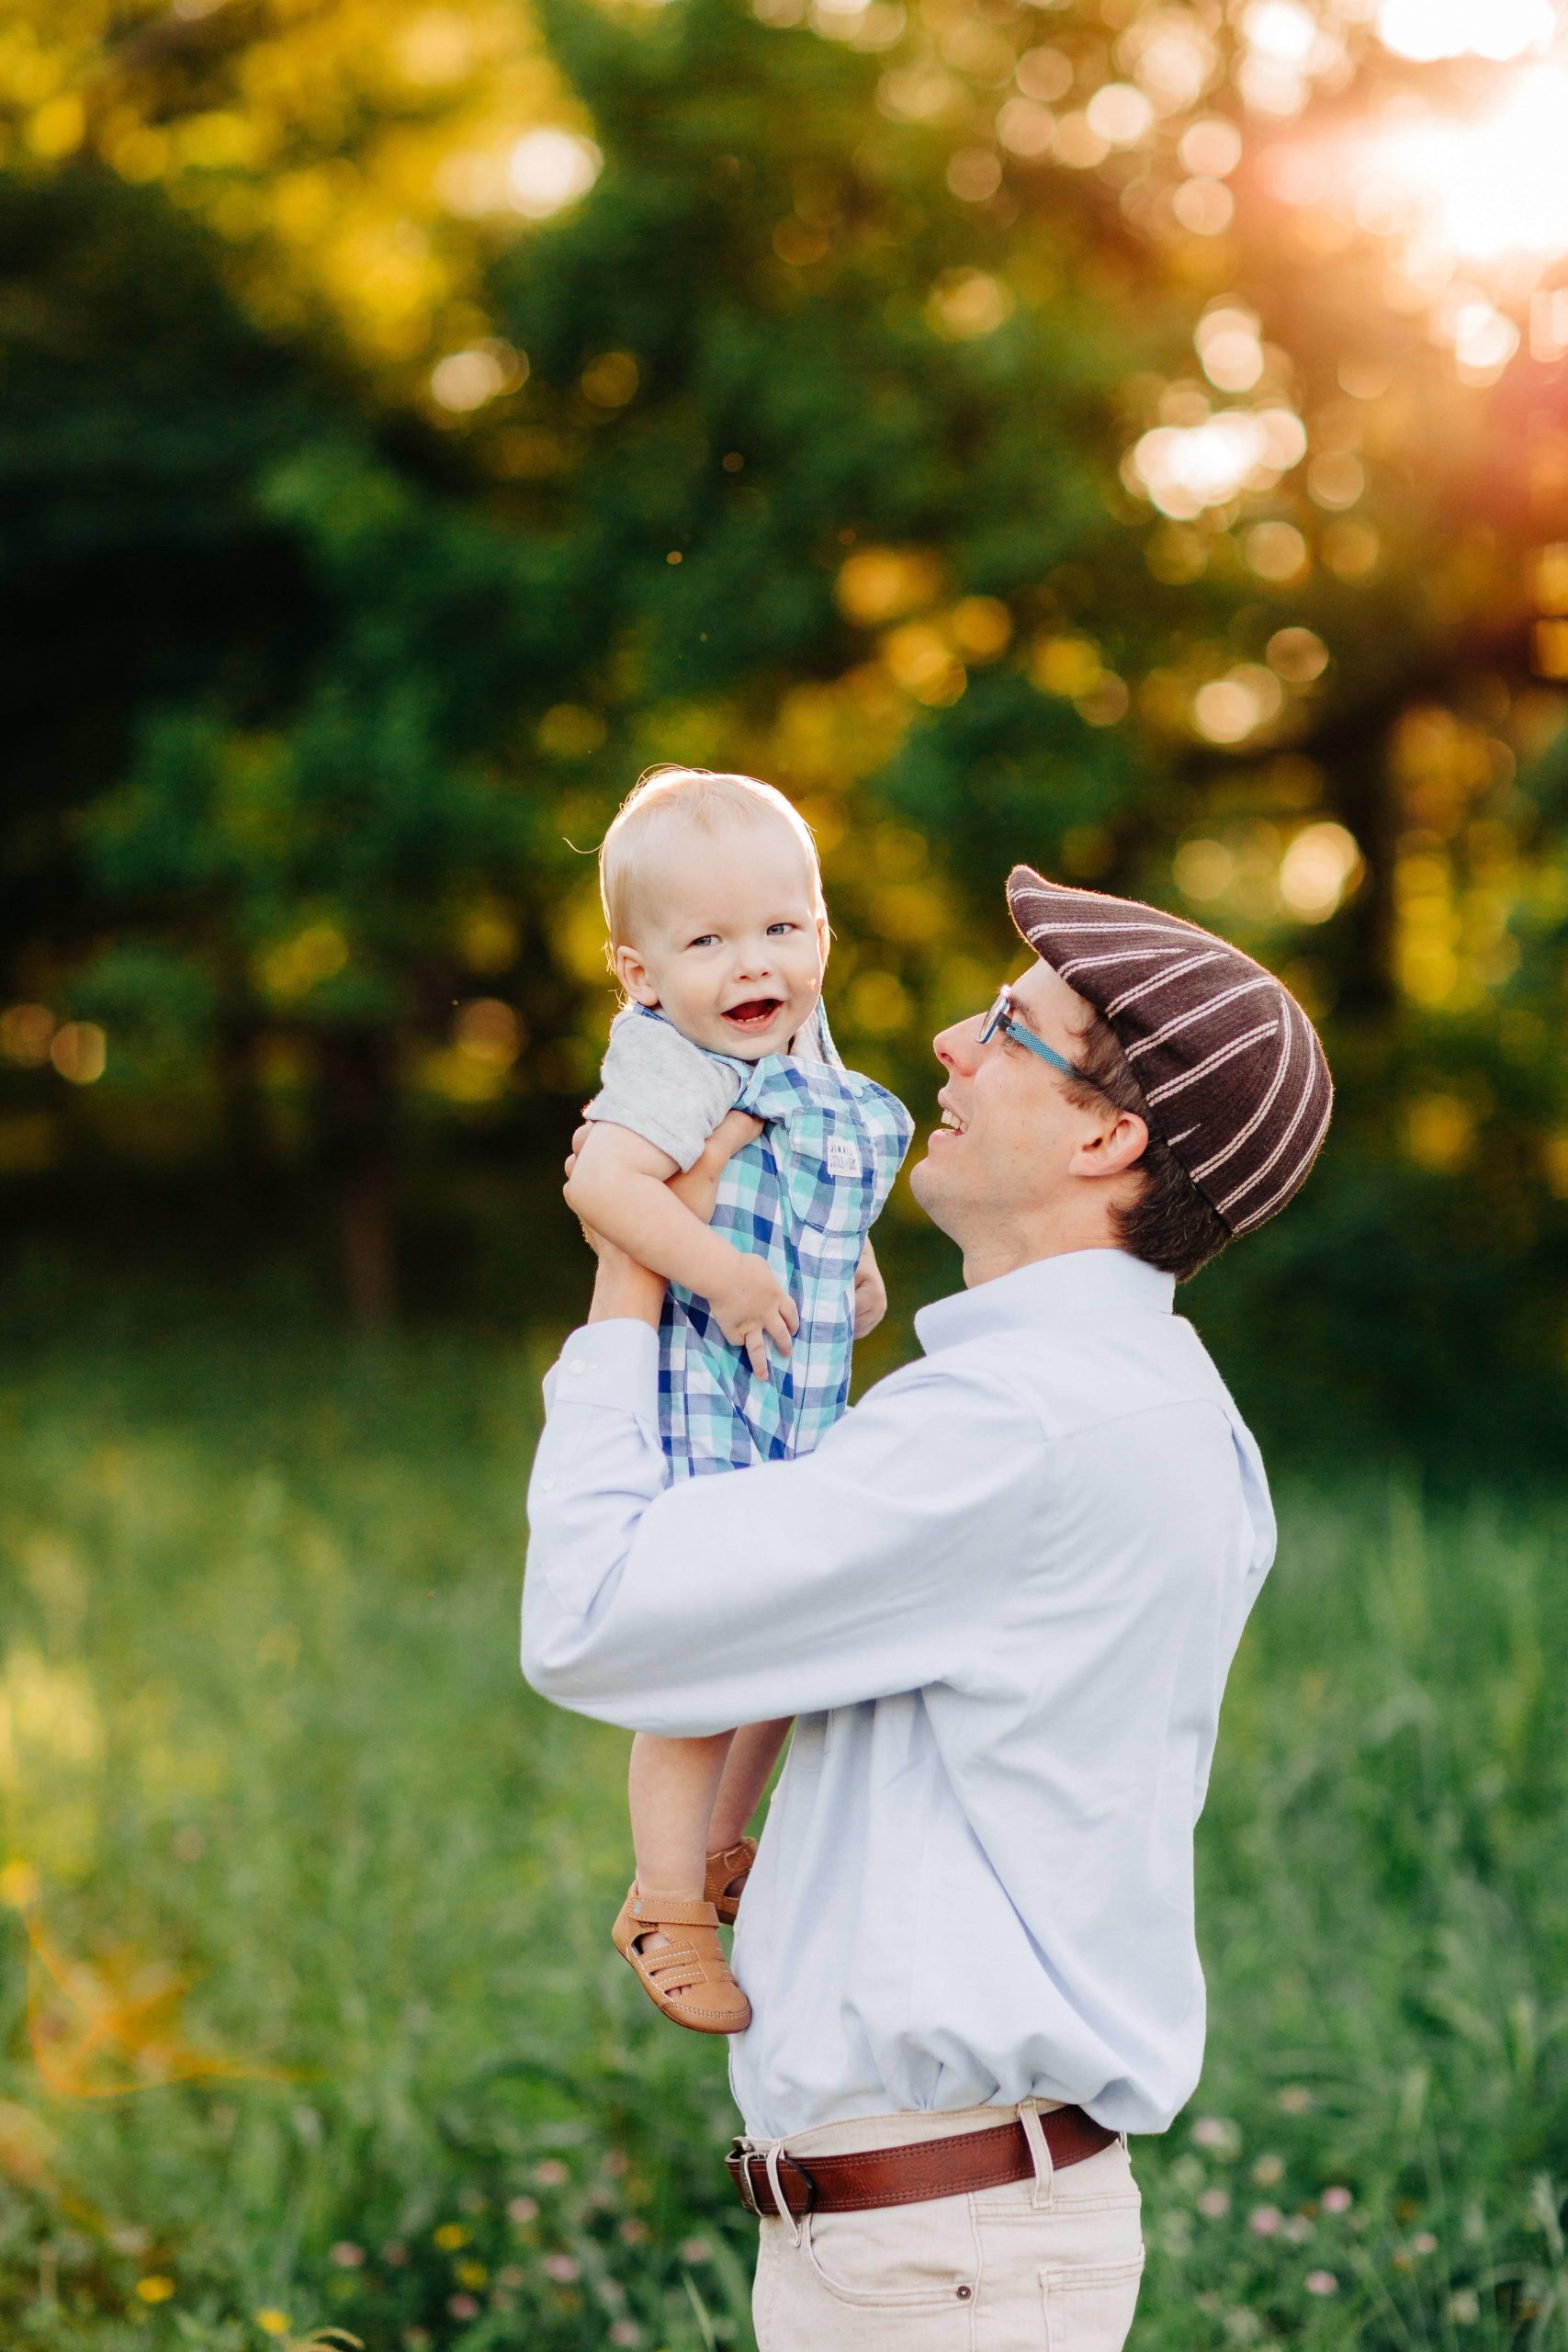 dad throwing baby in air, sunset first birthday session, smiling baby, baby in plaid